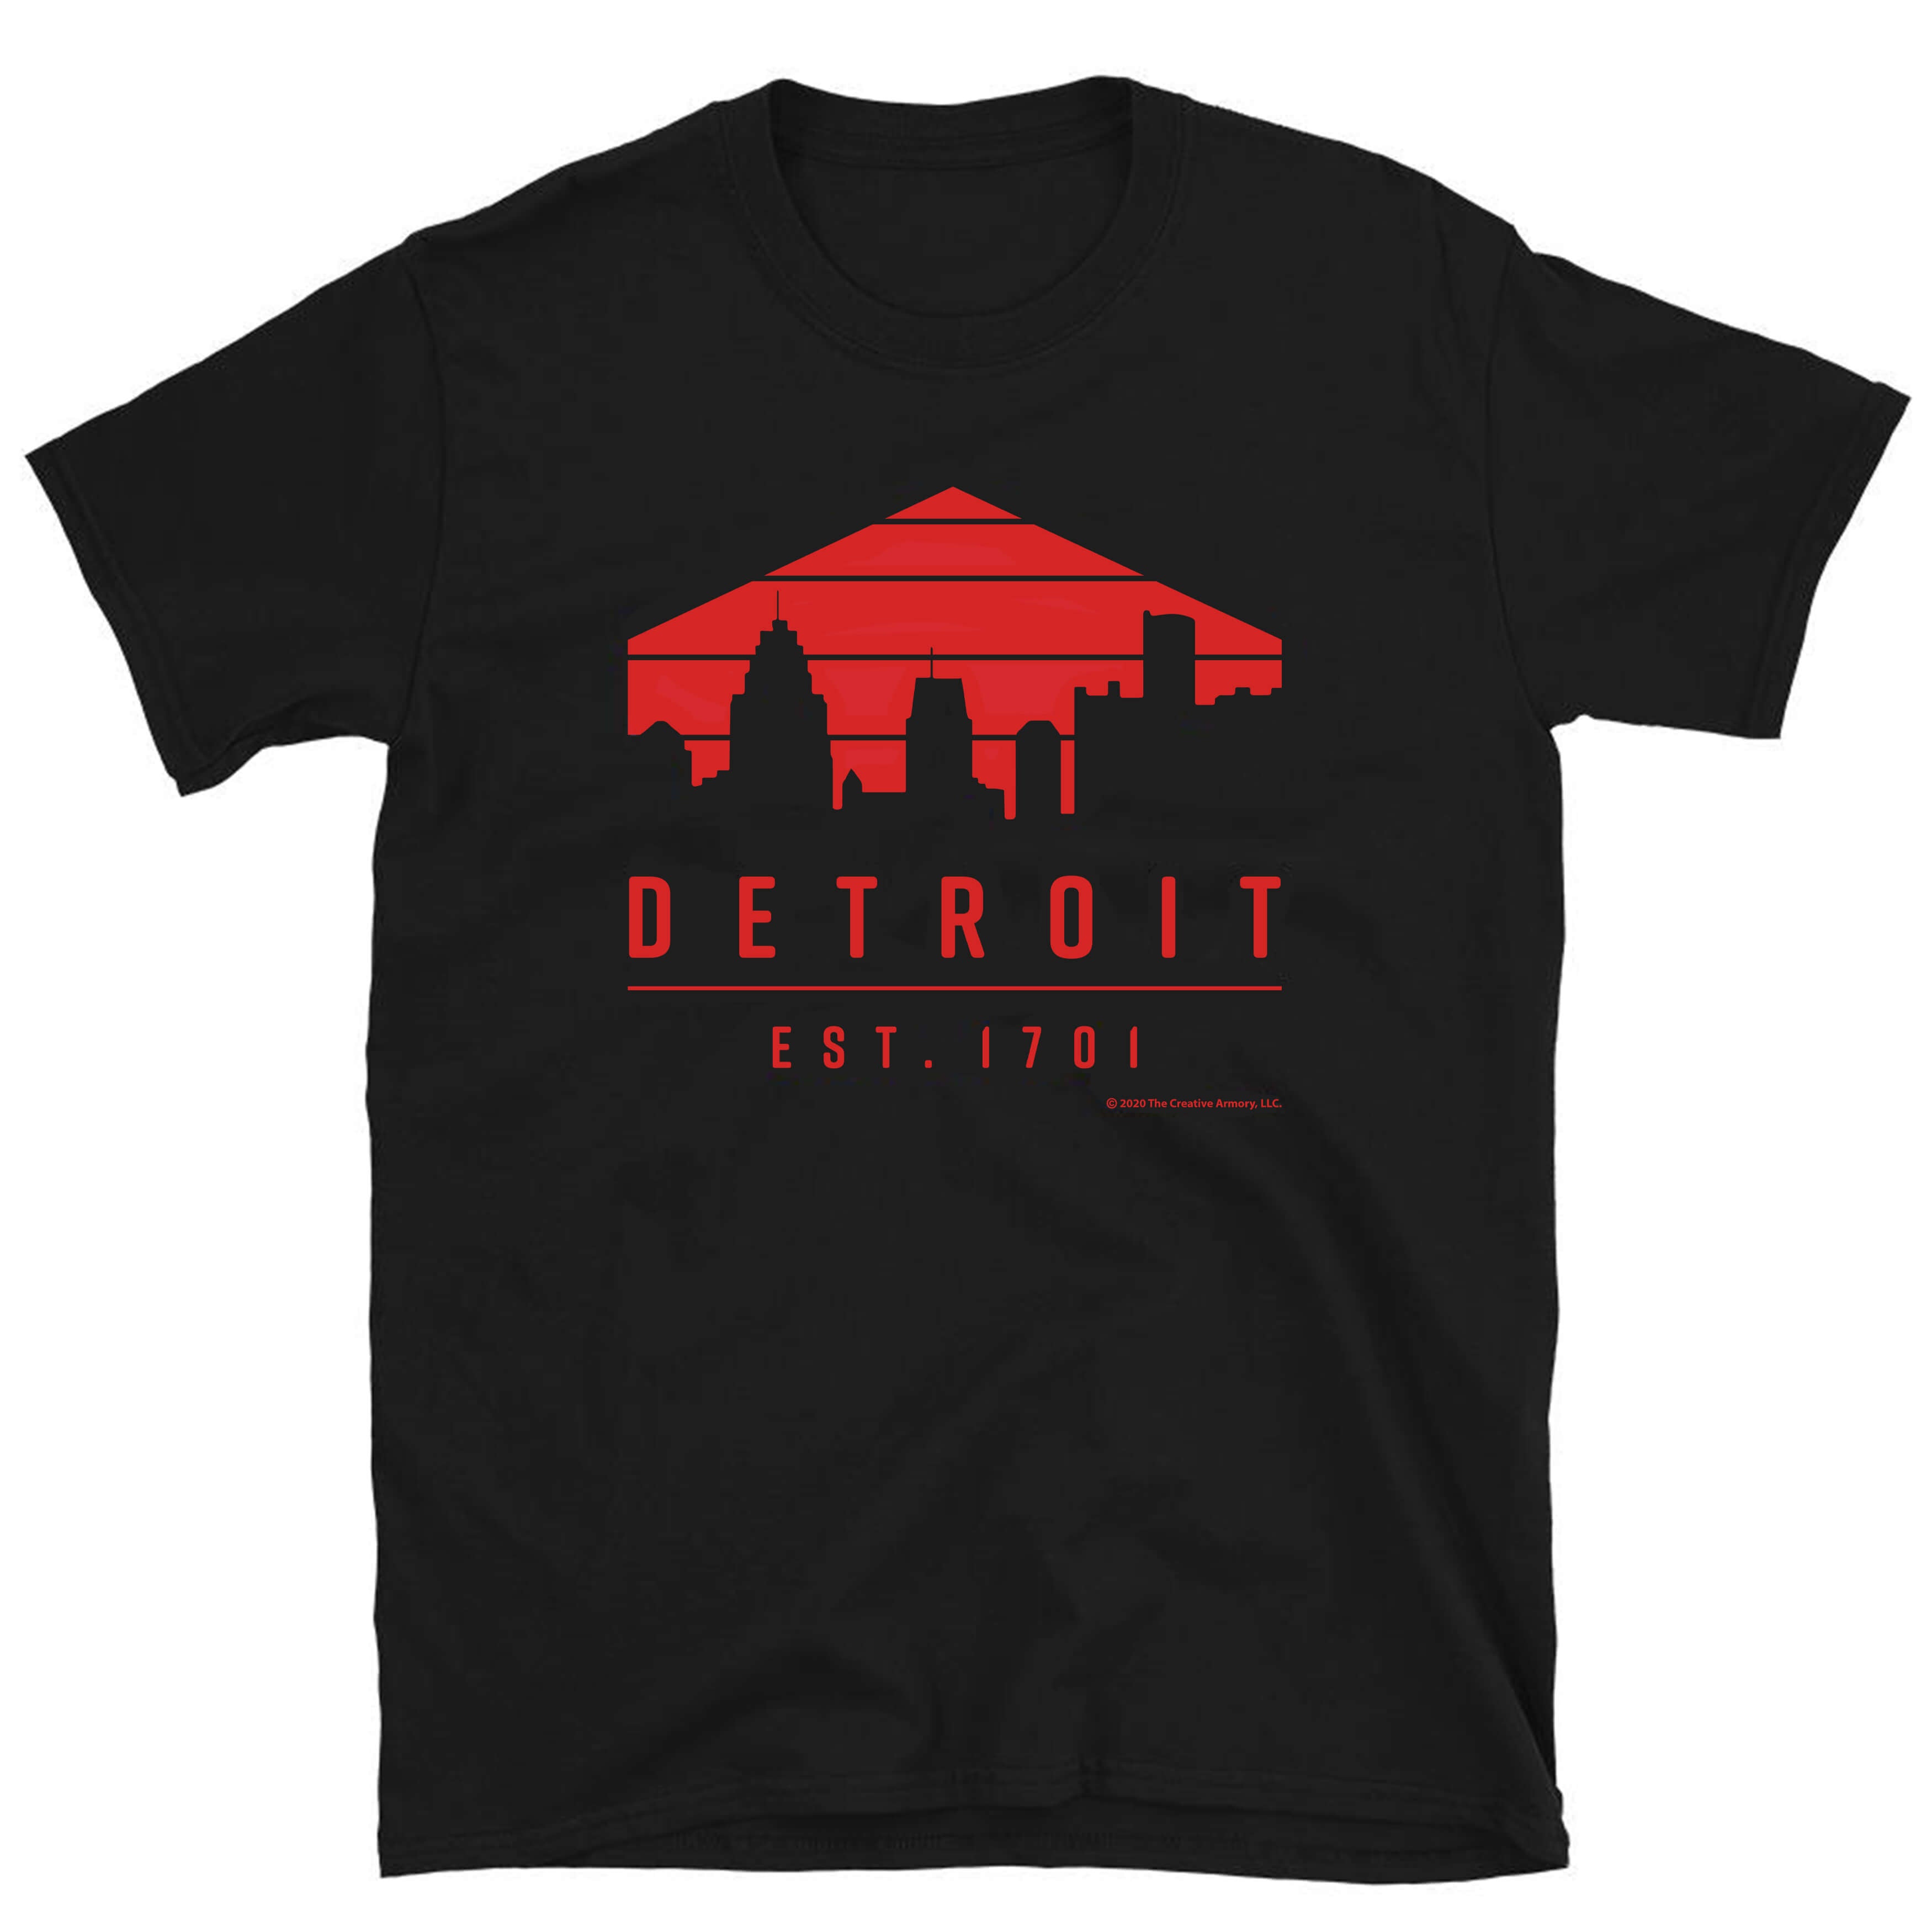 Detroit 1701 T-Shirt (Black and Red)